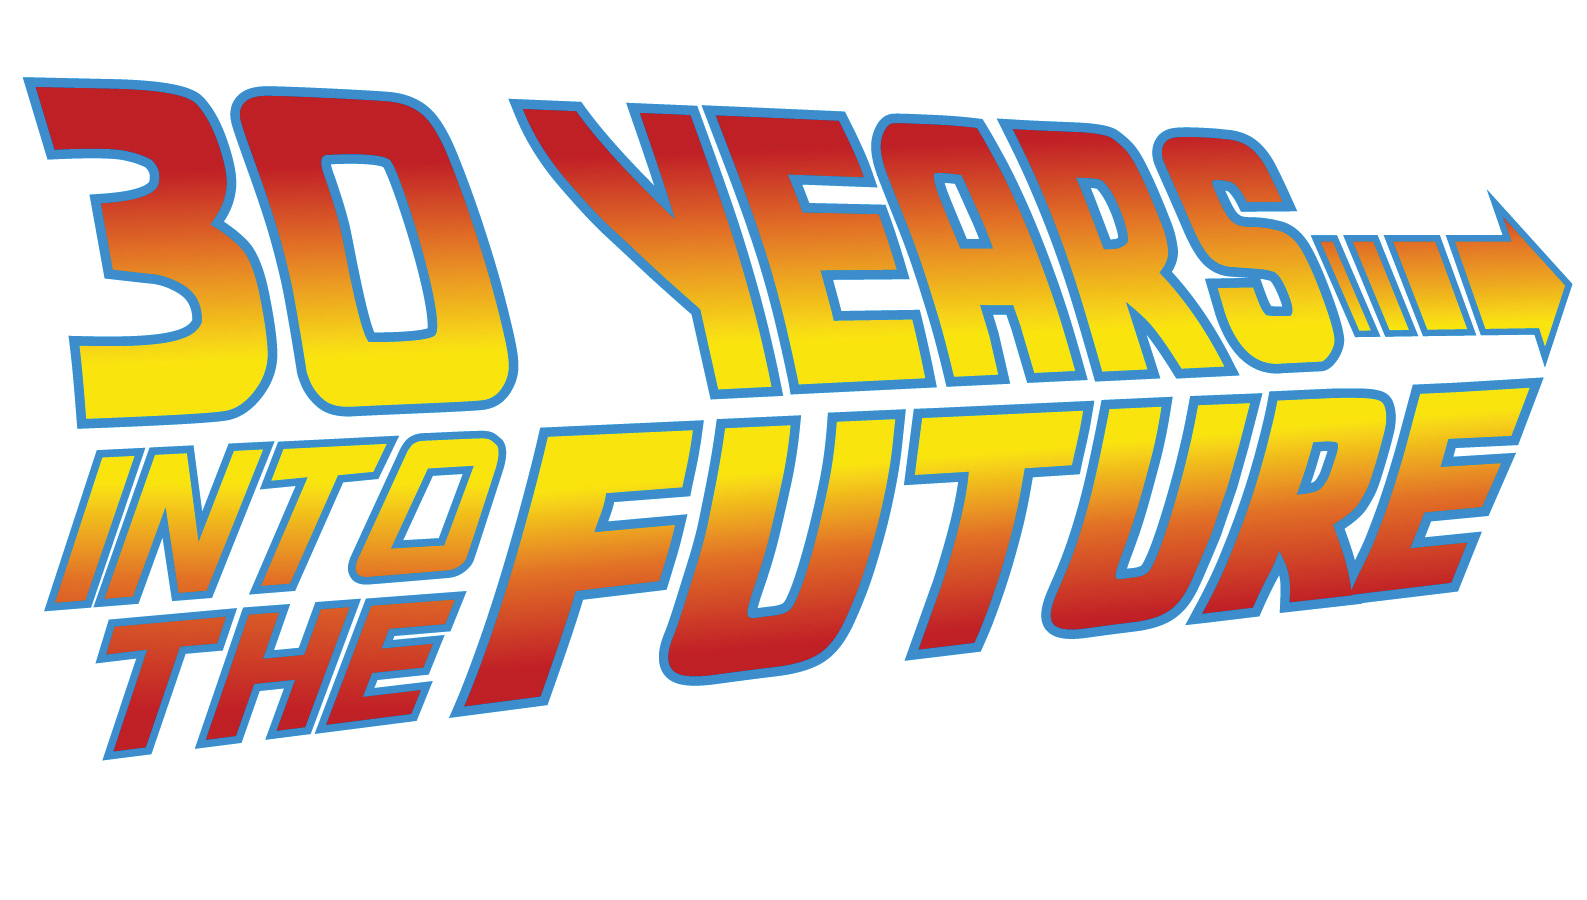 DARPA Graphic, reads "30 Years Into The Future"